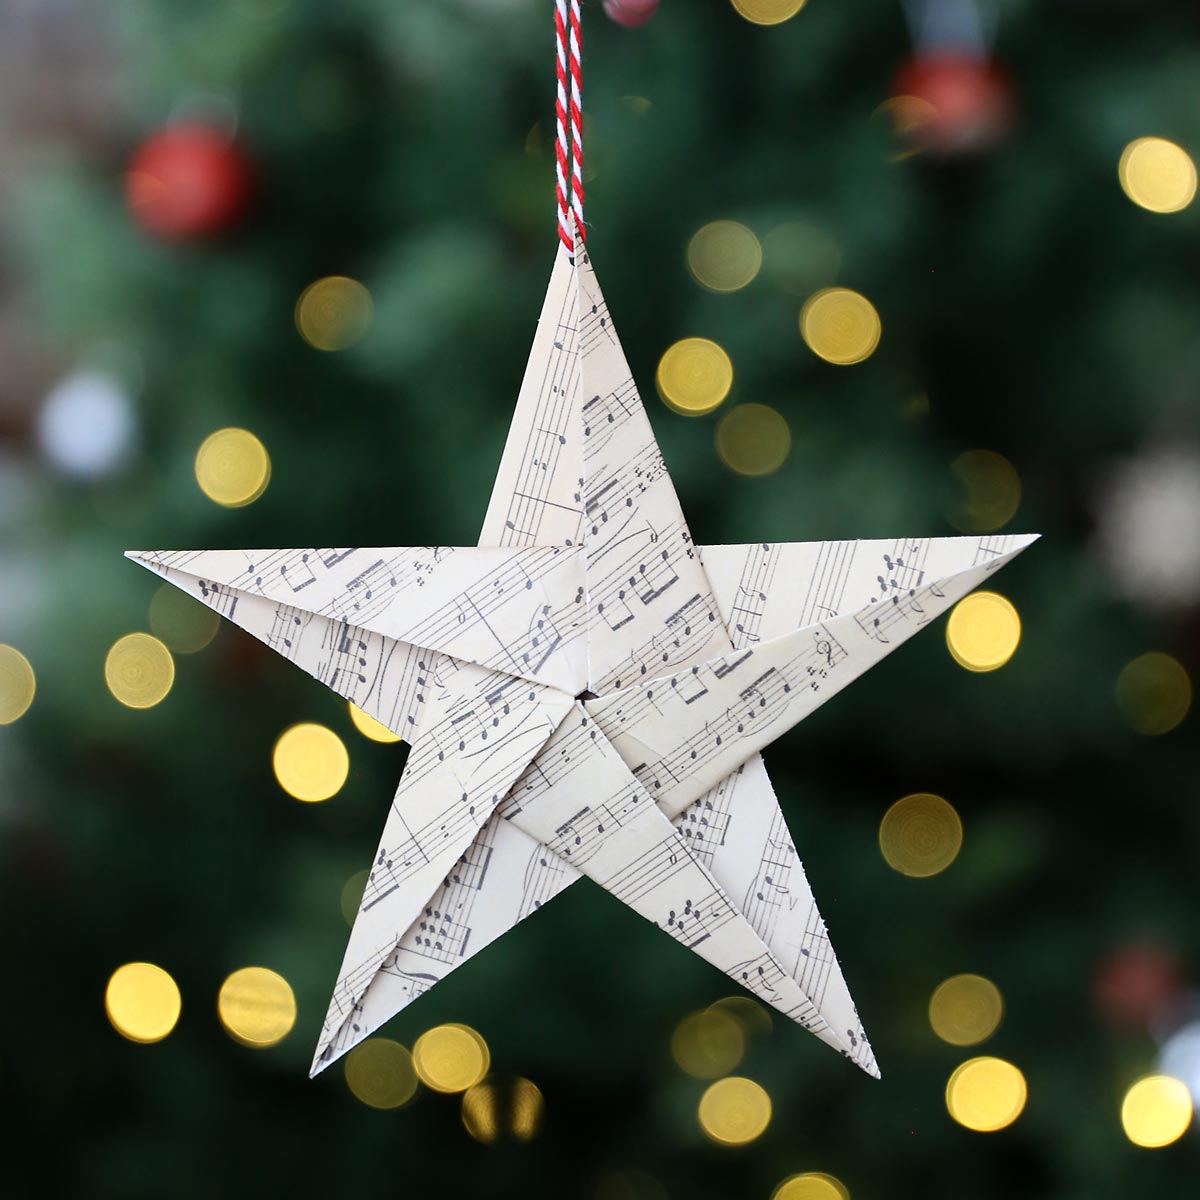 DIY Ornaments - Origami Stars - 100 Things 2 Do